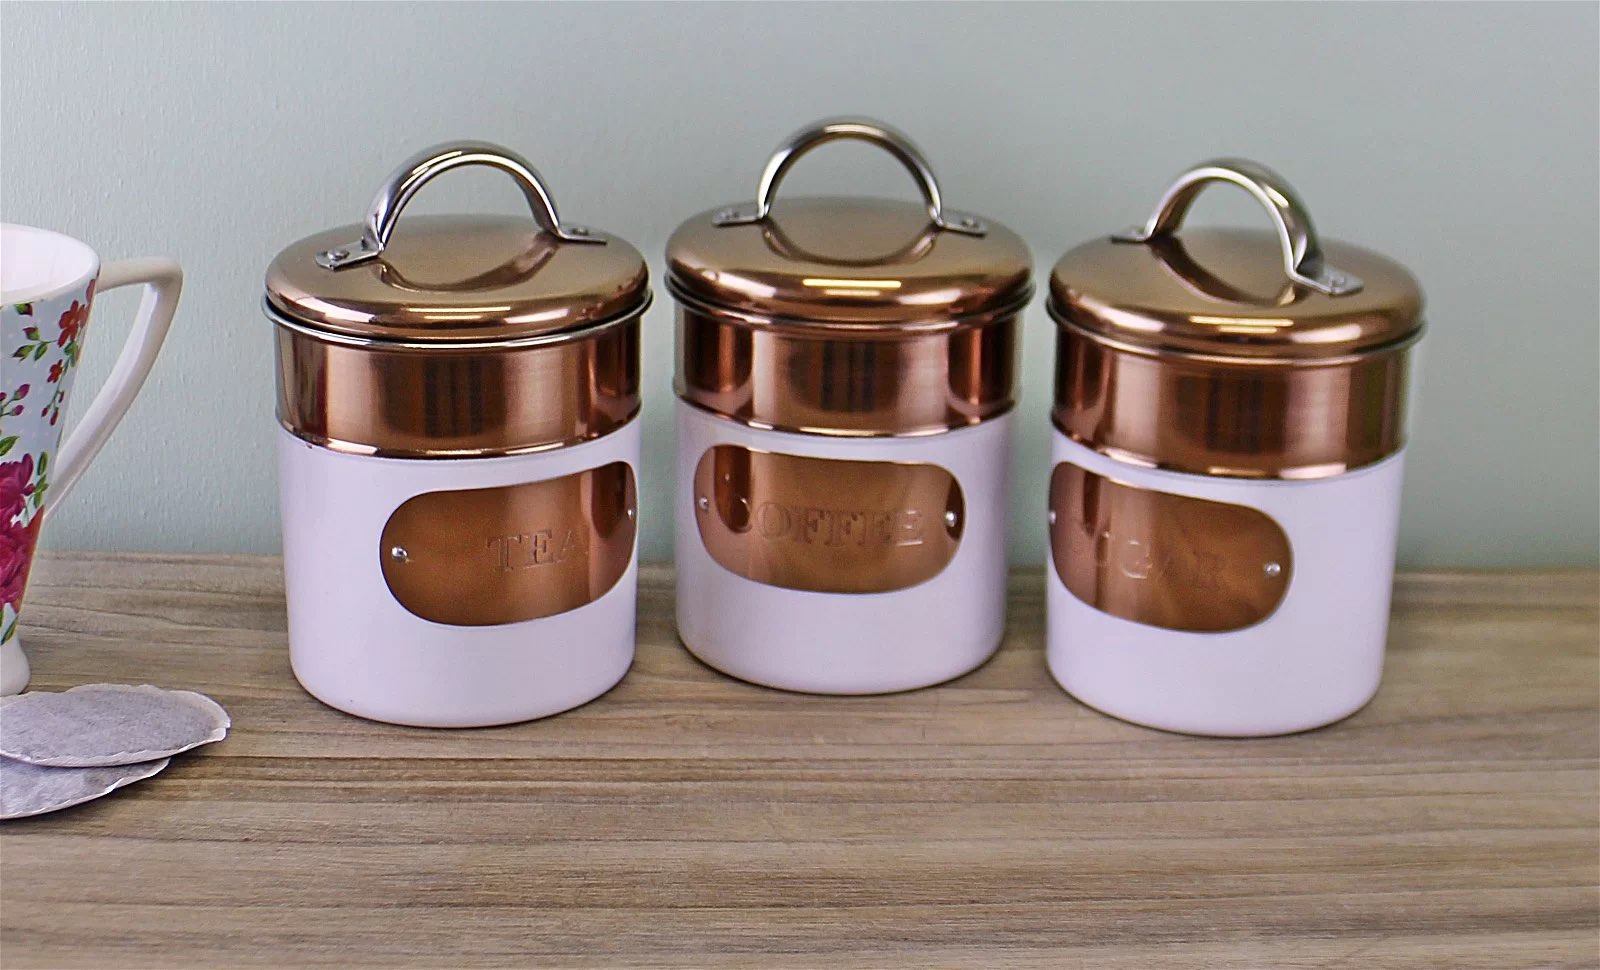 Get the right bling tea coffee sugar canisters to organise your kitchen